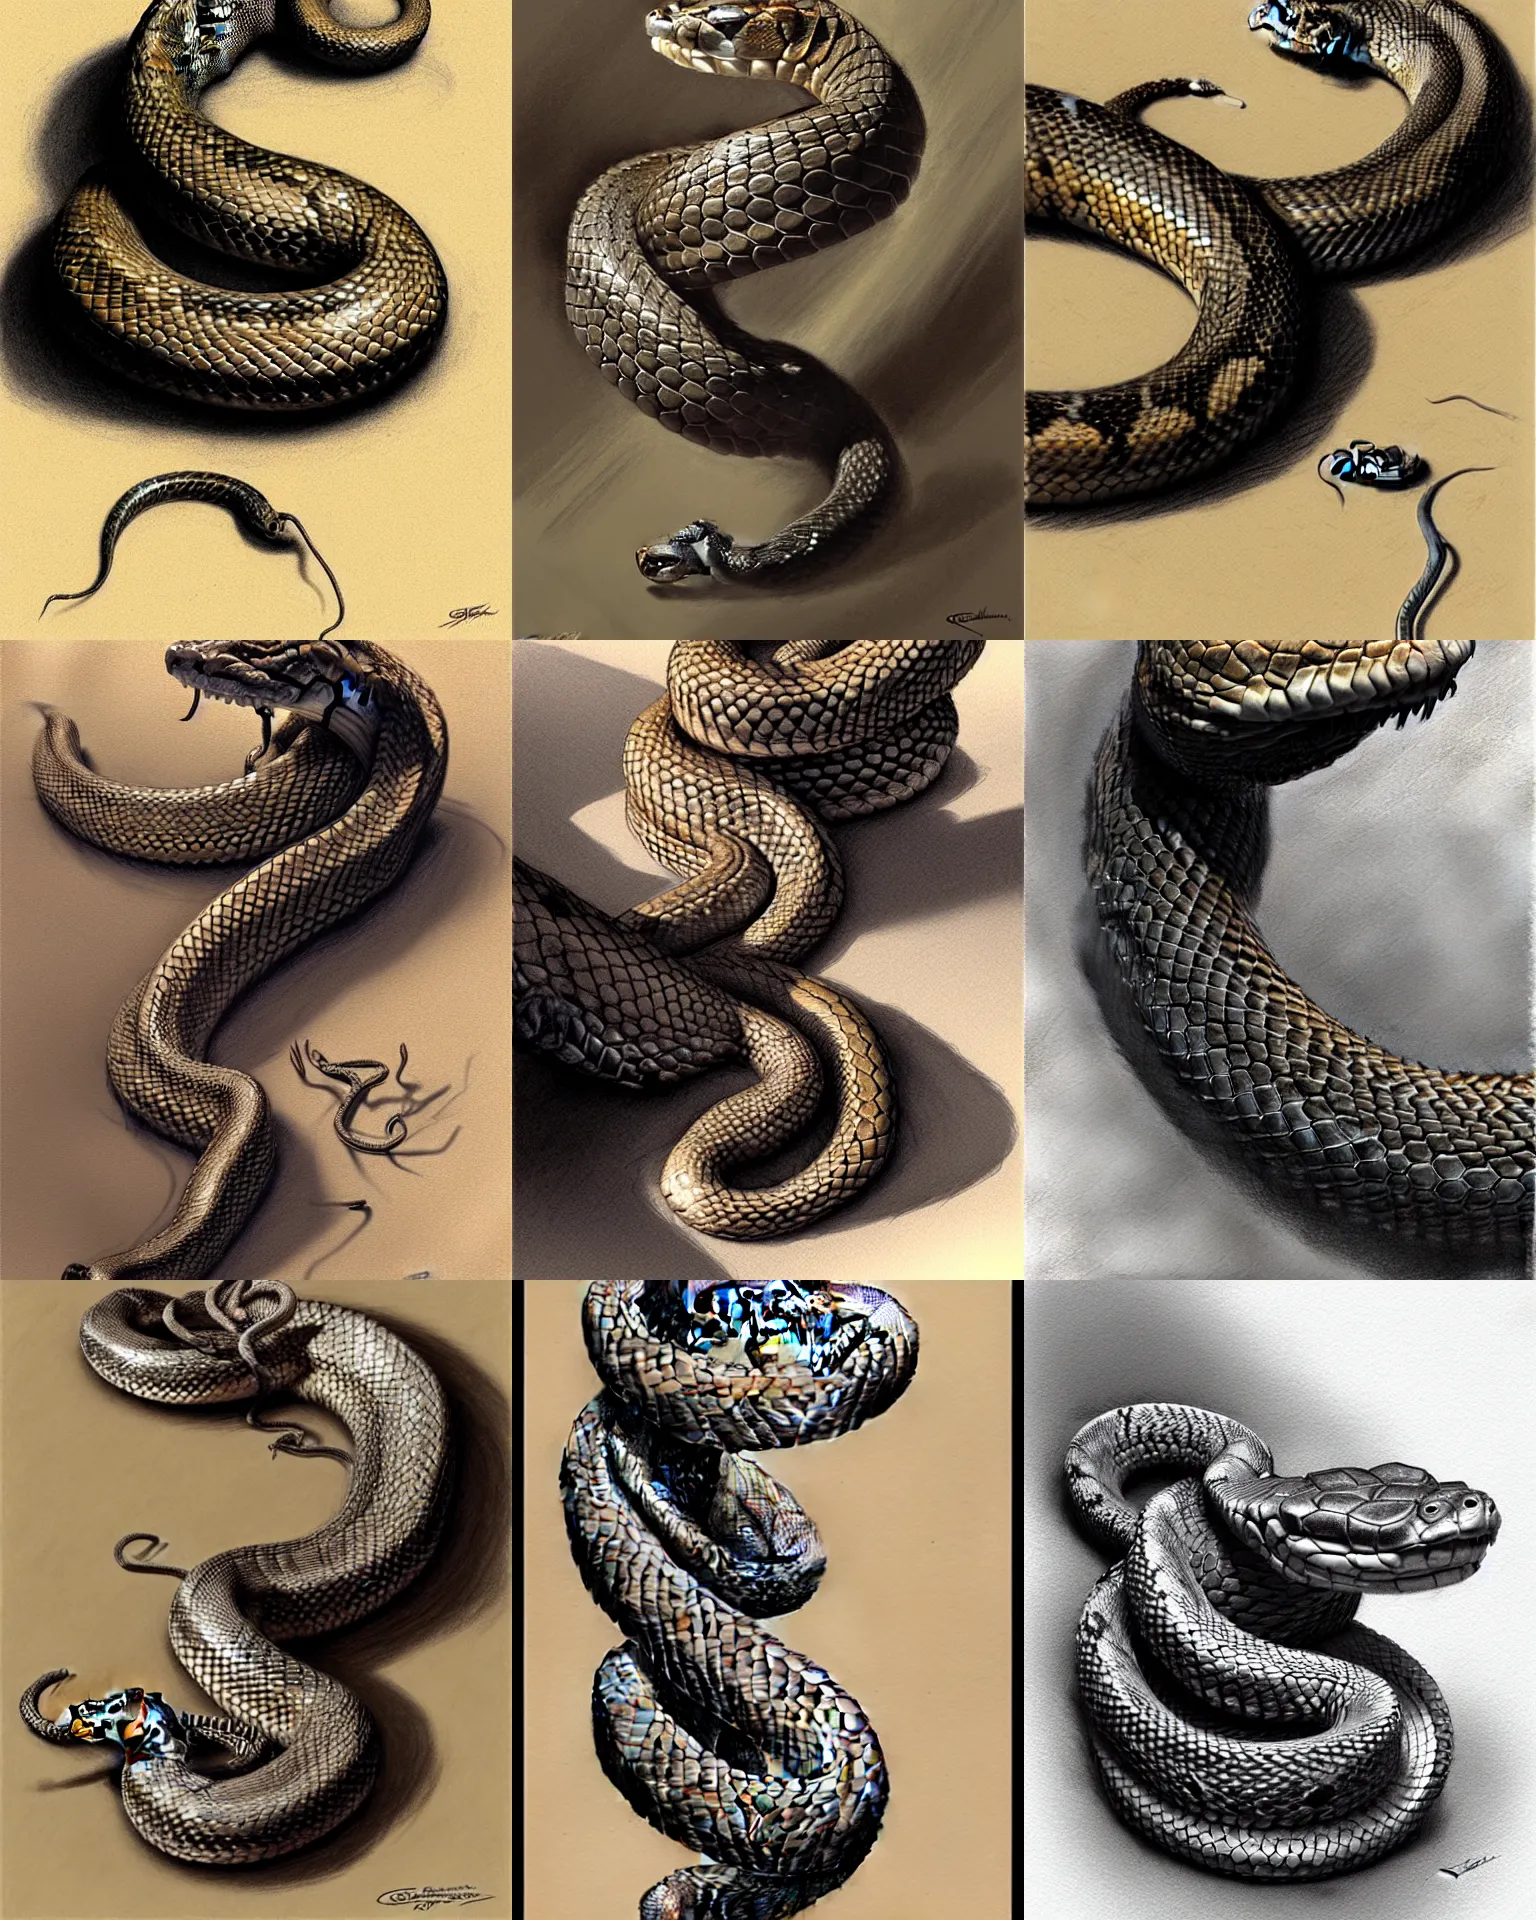 Jaden Congdon Art - Hello all! I finished this Snake drawing today. Like  always there is room for improvement but I find snakes to be tricky and am  proud of how this